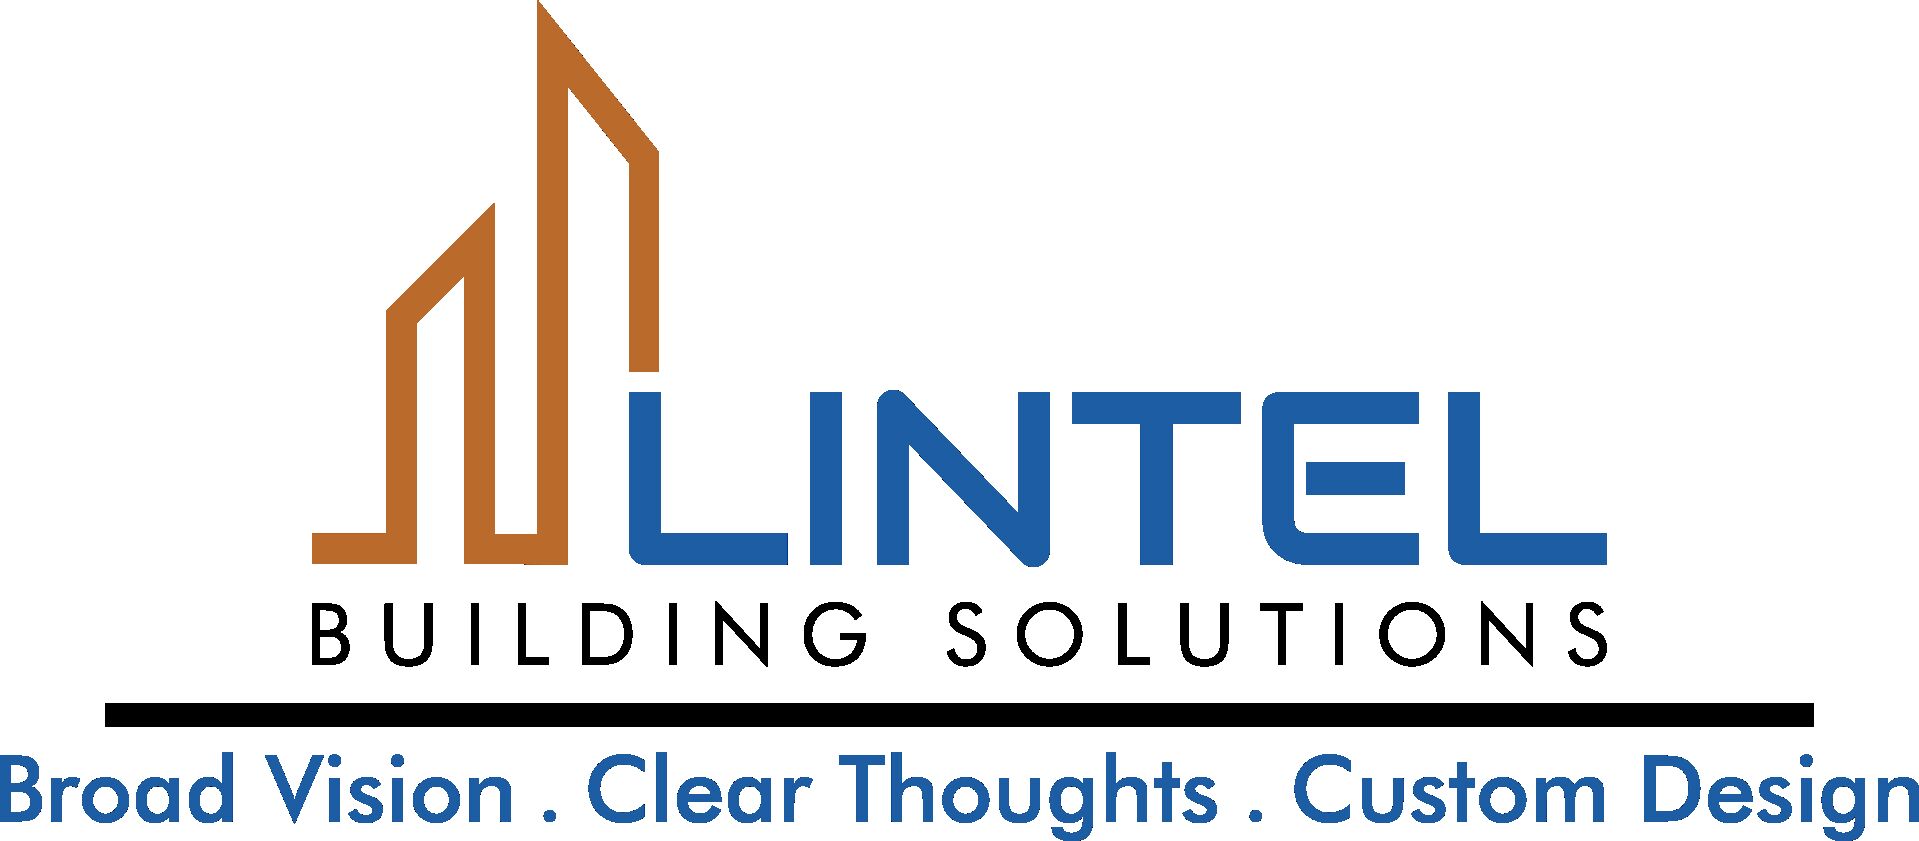 Welcome to Lintel Building Solutions